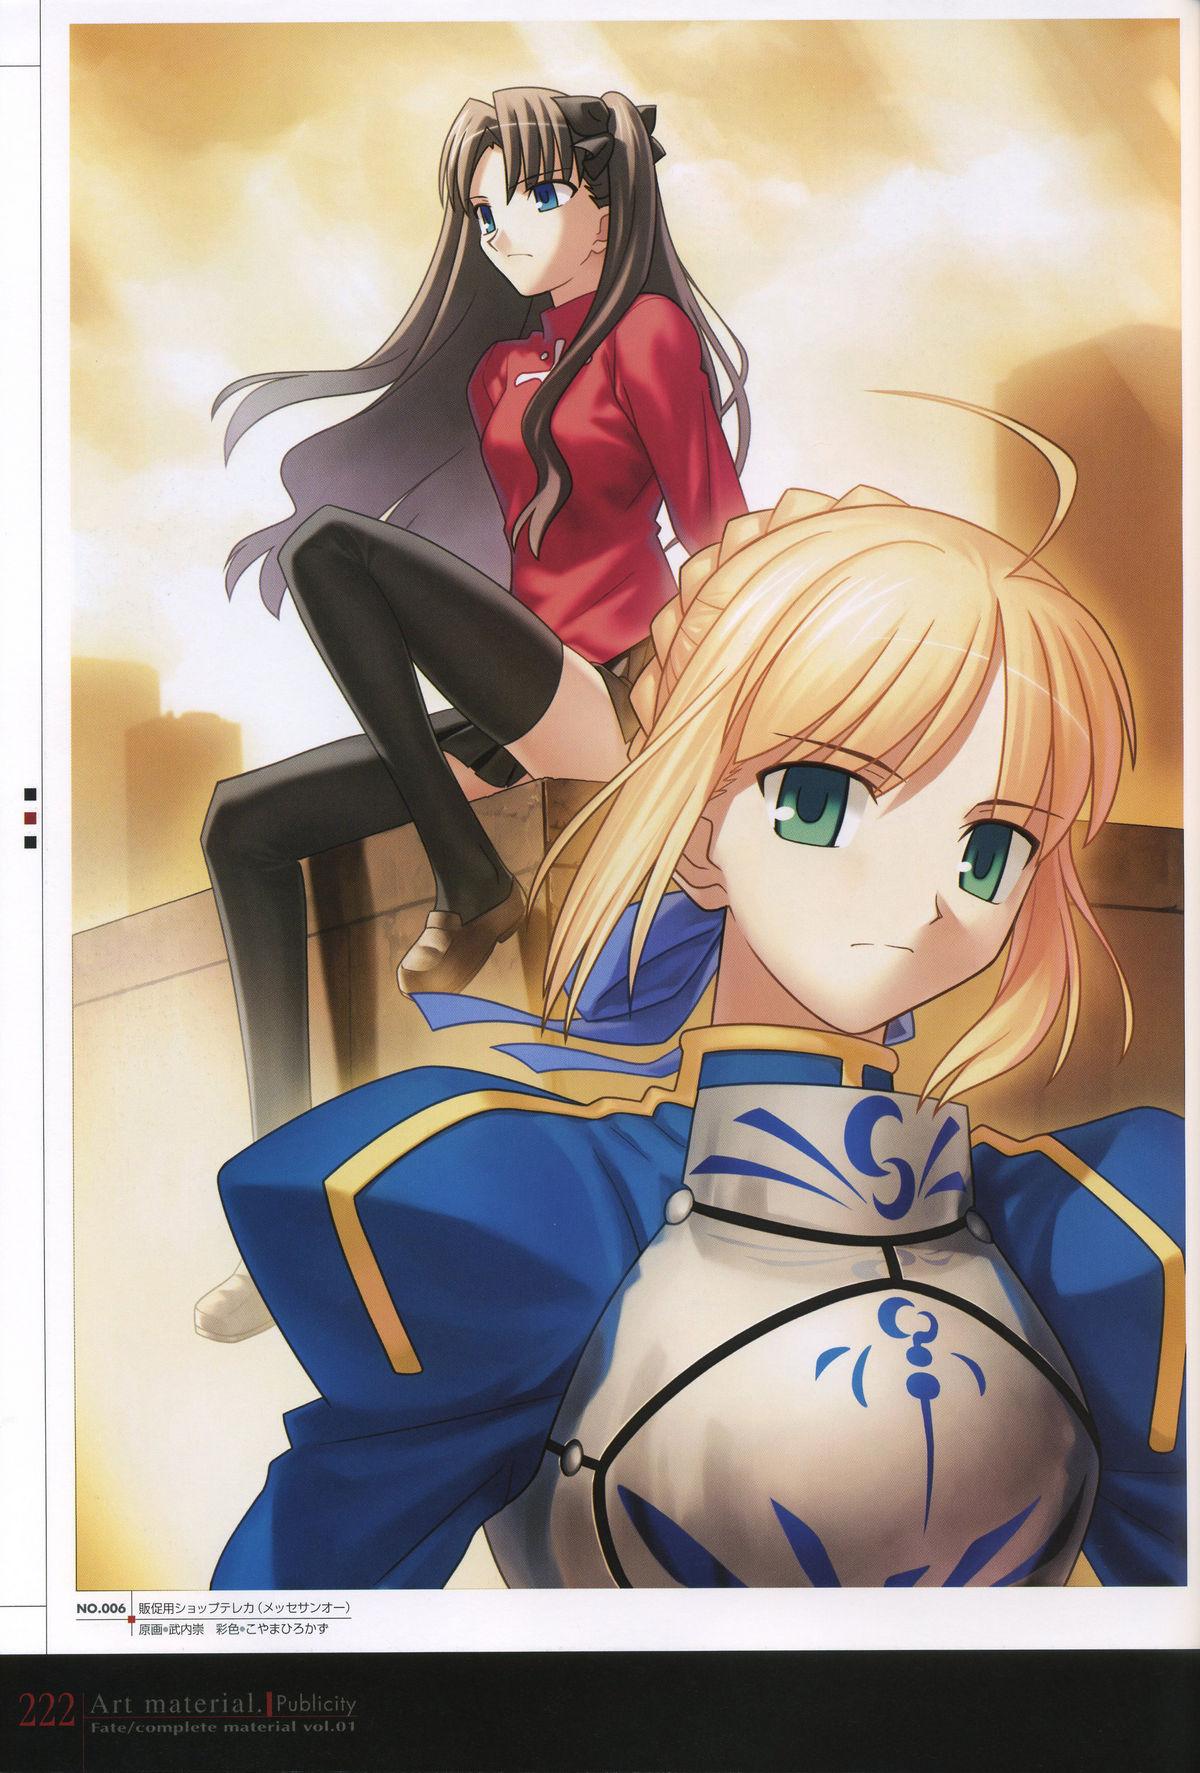 Fate/complete material I - Art material. 226